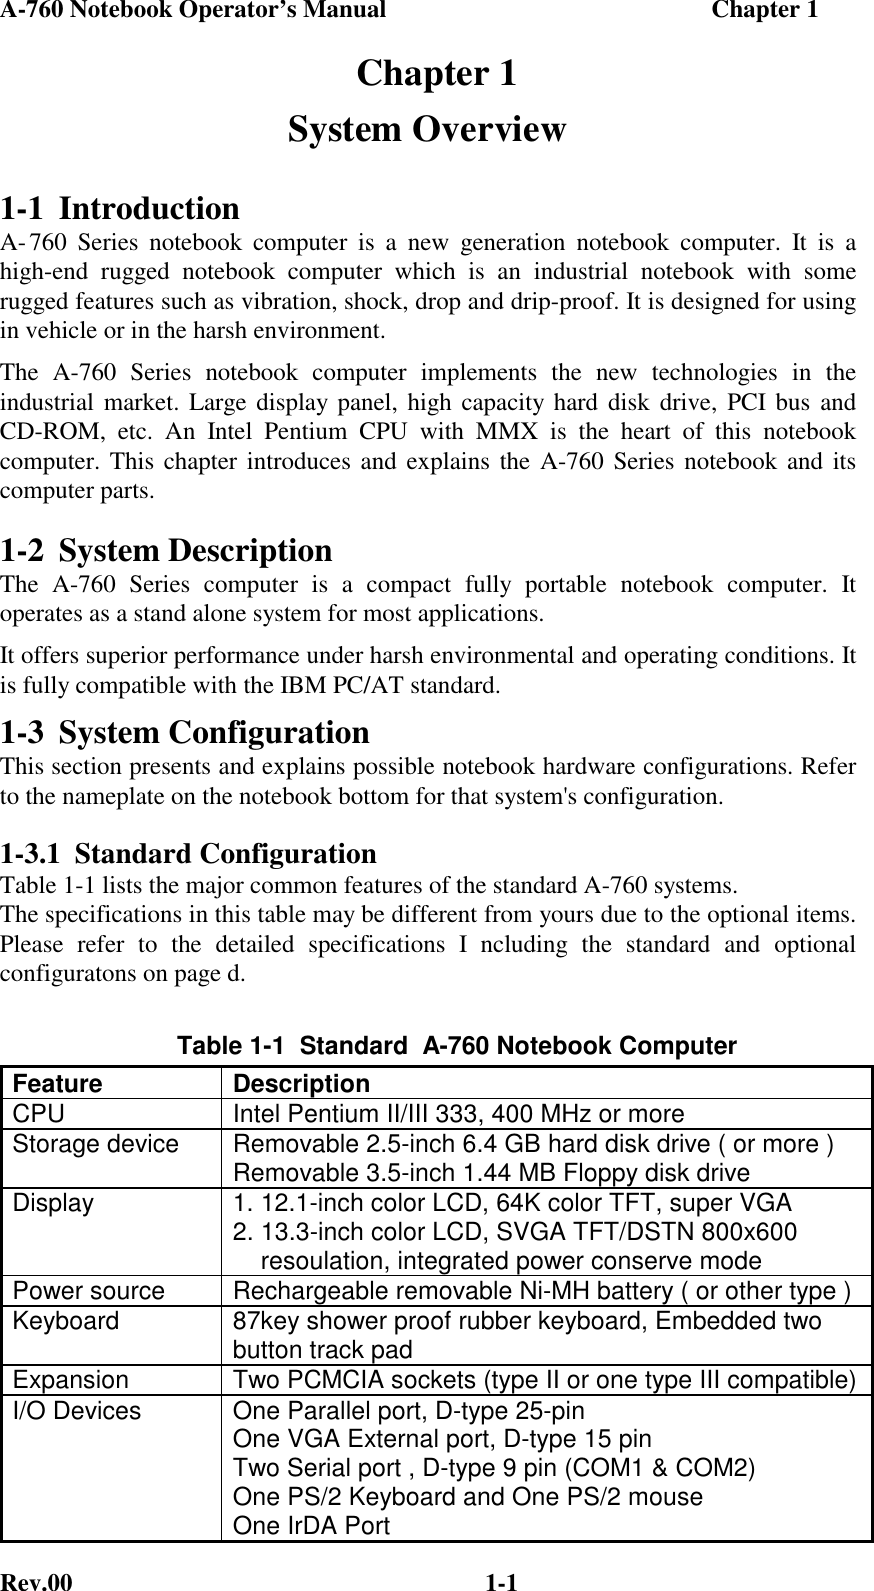 A-760 Notebook Operator’s Manual                                                    Chapter 1Rev.00 1-1  Chapter 1System Overview1-1 IntroductionA- 760 Series notebook computer is a new generation notebook computer. It is ahigh-end rugged notebook computer which is an industrial notebook with somerugged features such as vibration, shock, drop and drip-proof. It is designed for usingin vehicle or in the harsh environment.The A-760 Series notebook computer implements the new technologies in theindustrial market. Large display panel, high capacity hard disk drive, PCI bus andCD-ROM, etc. An Intel Pentium CPU with MMX is the heart of this notebookcomputer. This chapter introduces and explains the A-760 Series notebook and itscomputer parts.1-2 System DescriptionThe A-760 Series computer is a compact fully portable notebook computer. Itoperates as a stand alone system for most applications.It offers superior performance under harsh environmental and operating conditions. Itis fully compatible with the IBM PC/AT standard.1-3 System ConfigurationThis section presents and explains possible notebook hardware configurations. Referto the nameplate on the notebook bottom for that system&apos;s configuration.1-3.1 Standard ConfigurationTable 1-1 lists the major common features of the standard A-760 systems.The specifications in this table may be different from yours due to the optional items.Please refer to the detailed specifications I ncluding the standard and optionalconfiguratons on page d.Table 1-1  Standard  A-760 Notebook ComputerFeature DescriptionCPU Intel Pentium II/III 333, 400 MHz or moreStorage device Removable 2.5-inch 6.4 GB hard disk drive ( or more )Removable 3.5-inch 1.44 MB Floppy disk driveDisplay 1. 12.1-inch color LCD, 64K color TFT, super VGA2. 13.3-inch color LCD, SVGA TFT/DSTN 800x600    resoulation, integrated power conserve modePower source Rechargeable removable Ni-MH battery ( or other type )Keyboard 87key shower proof rubber keyboard, Embedded twobutton track padExpansion Two PCMCIA sockets (type II or one type III compatible)I/O Devices One Parallel port, D-type 25-pinOne VGA External port, D-type 15 pinTwo Serial port , D-type 9 pin (COM1 &amp; COM2)One PS/2 Keyboard and One PS/2 mouseOne IrDA Port